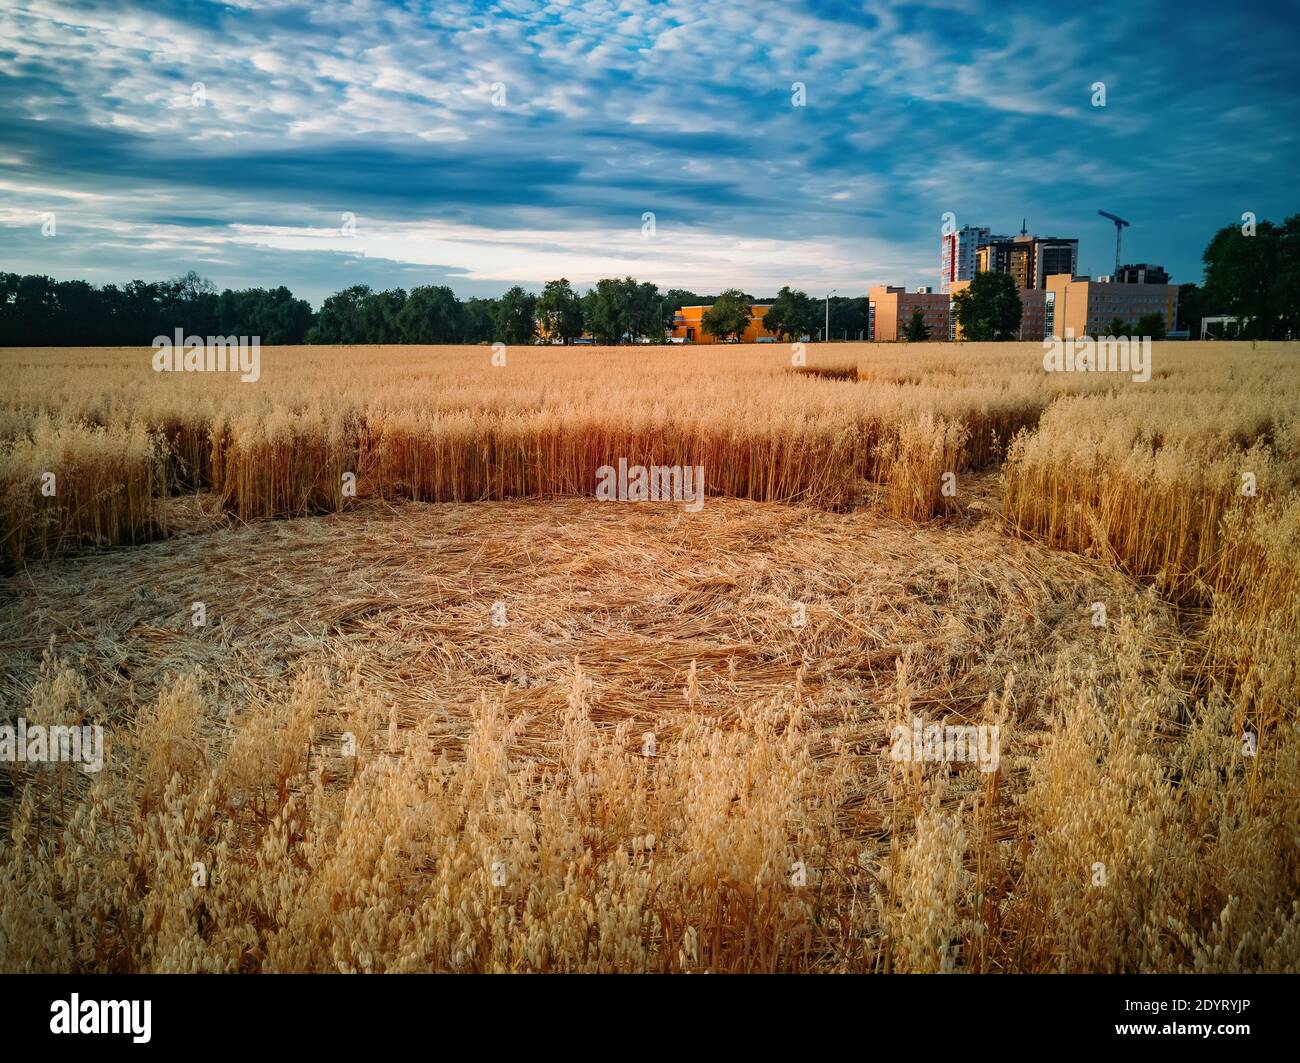 Mysterious crop circle in oat field near the city at the evening sunset. Stock Photo